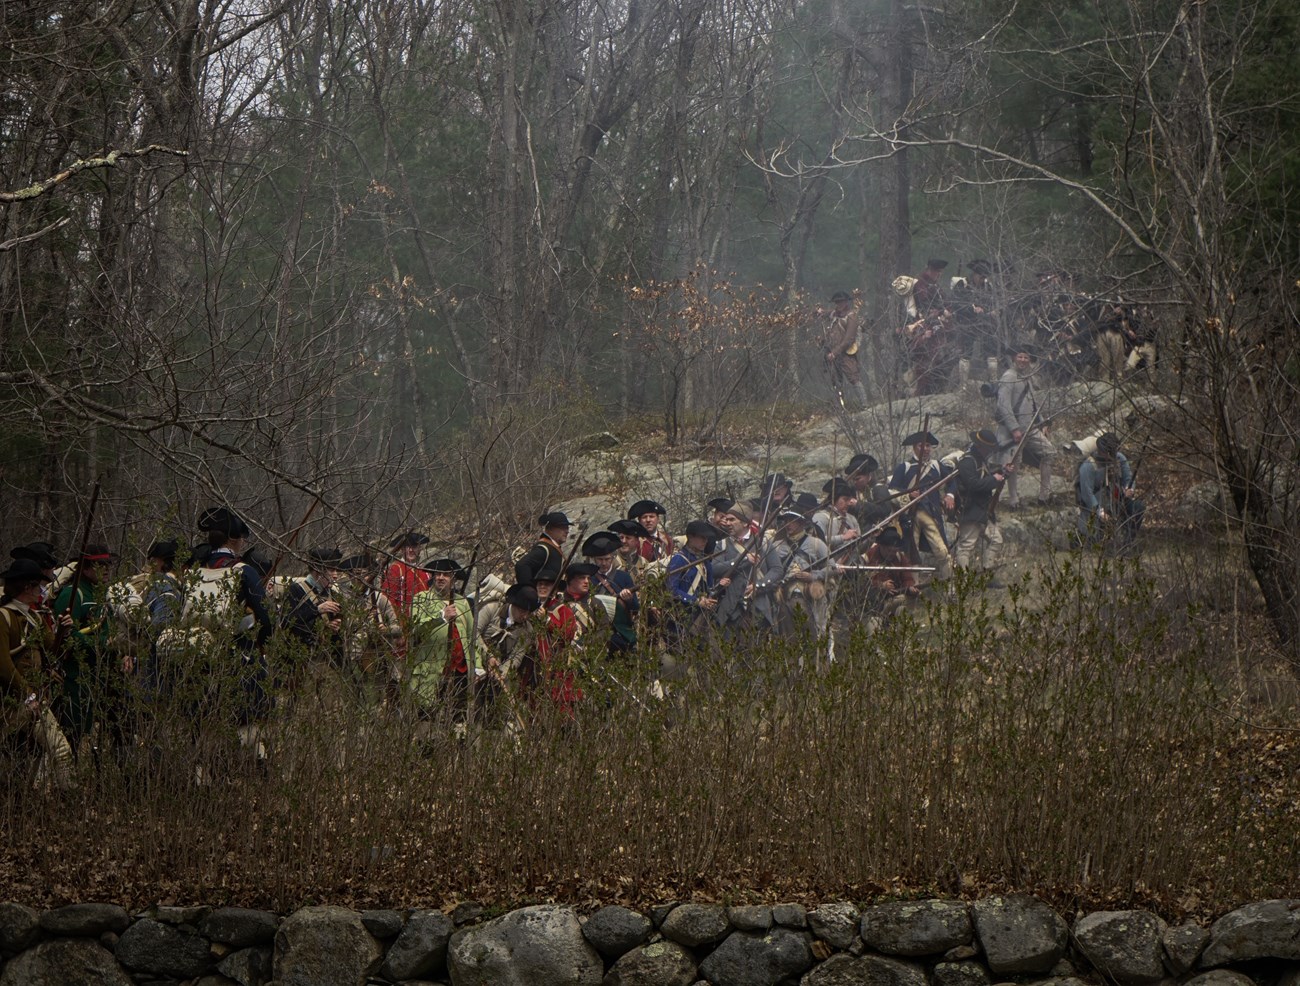 Colonial militiamen stand in line in a wooded landscape and fire their muskets